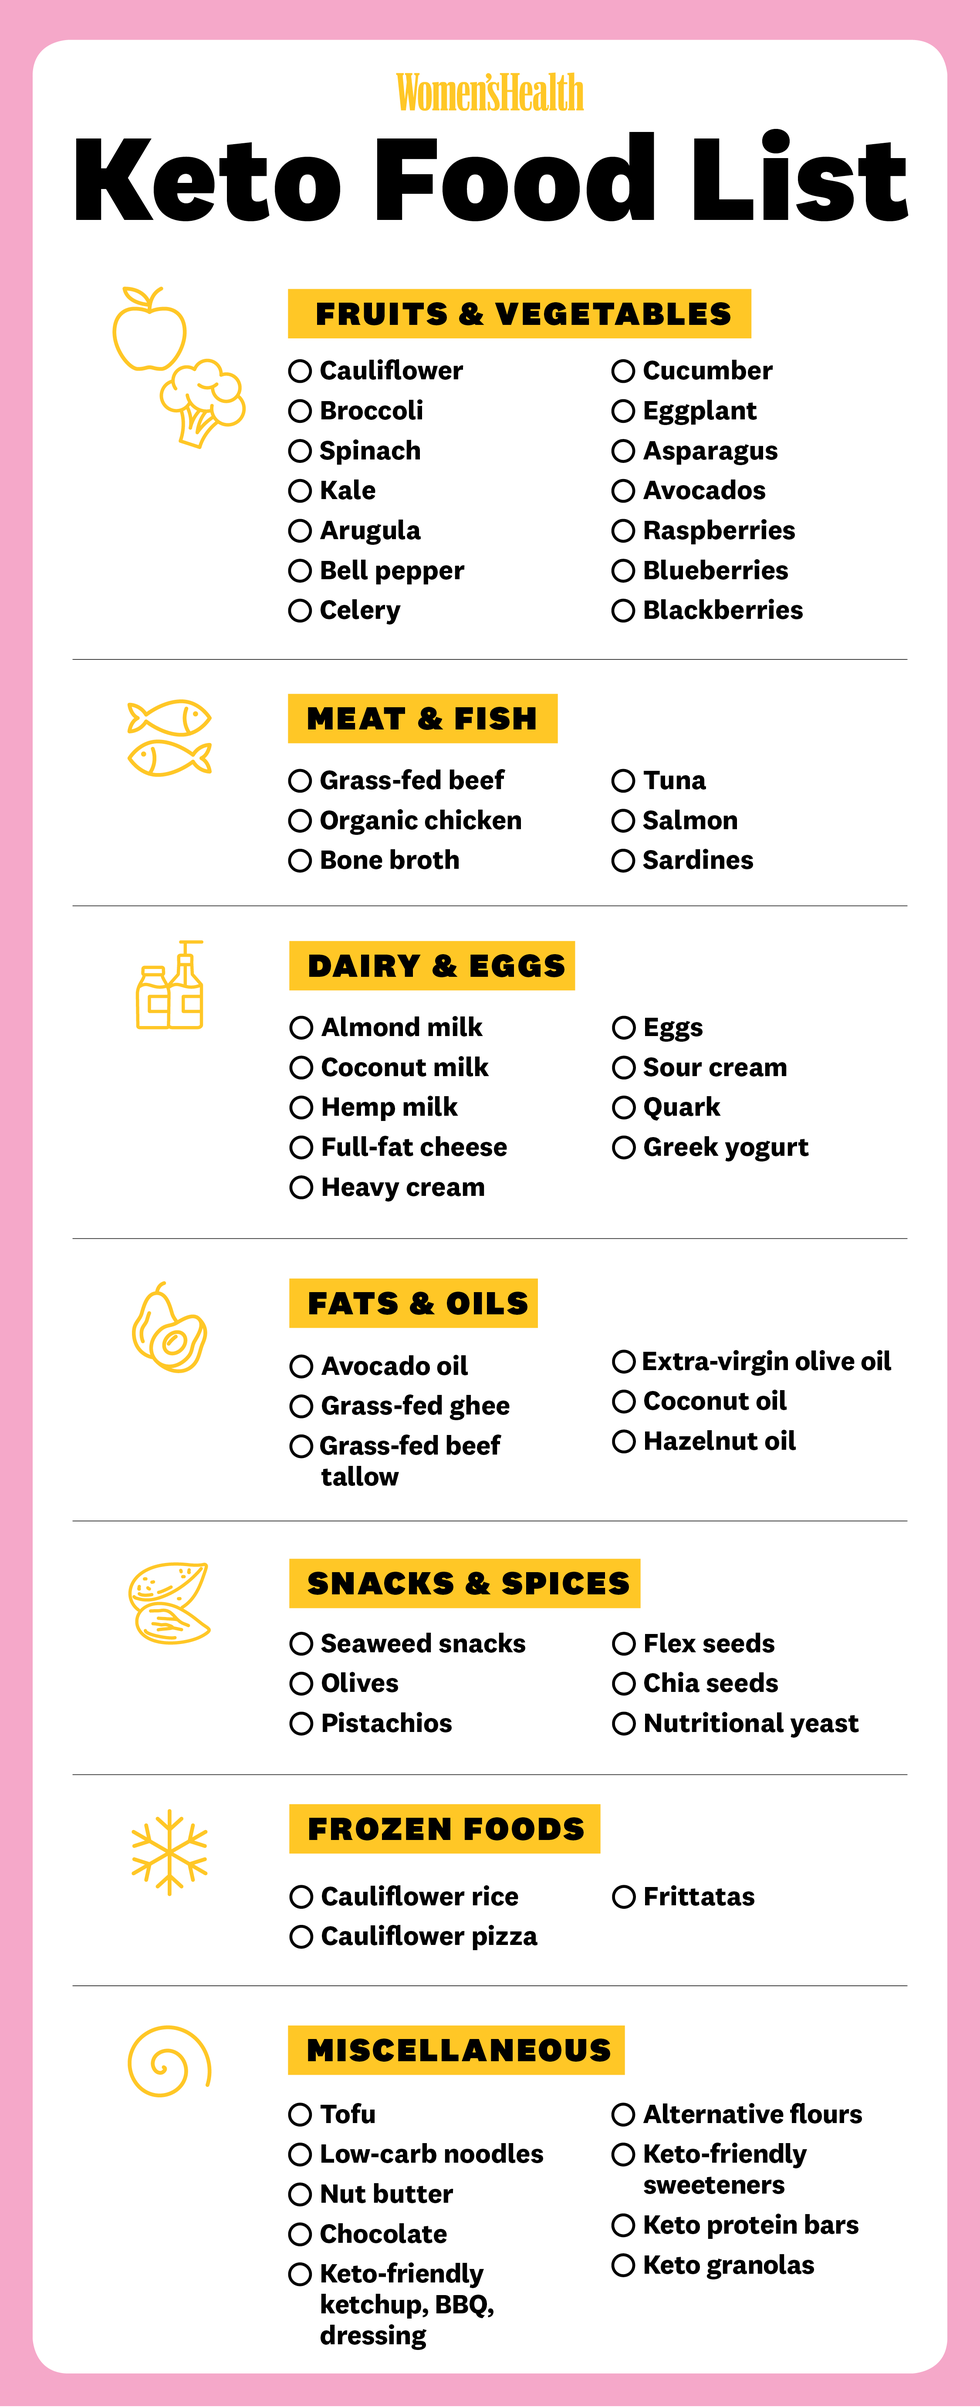 Keto Food List For Beginners: What To Eat, Avoid, Substitute